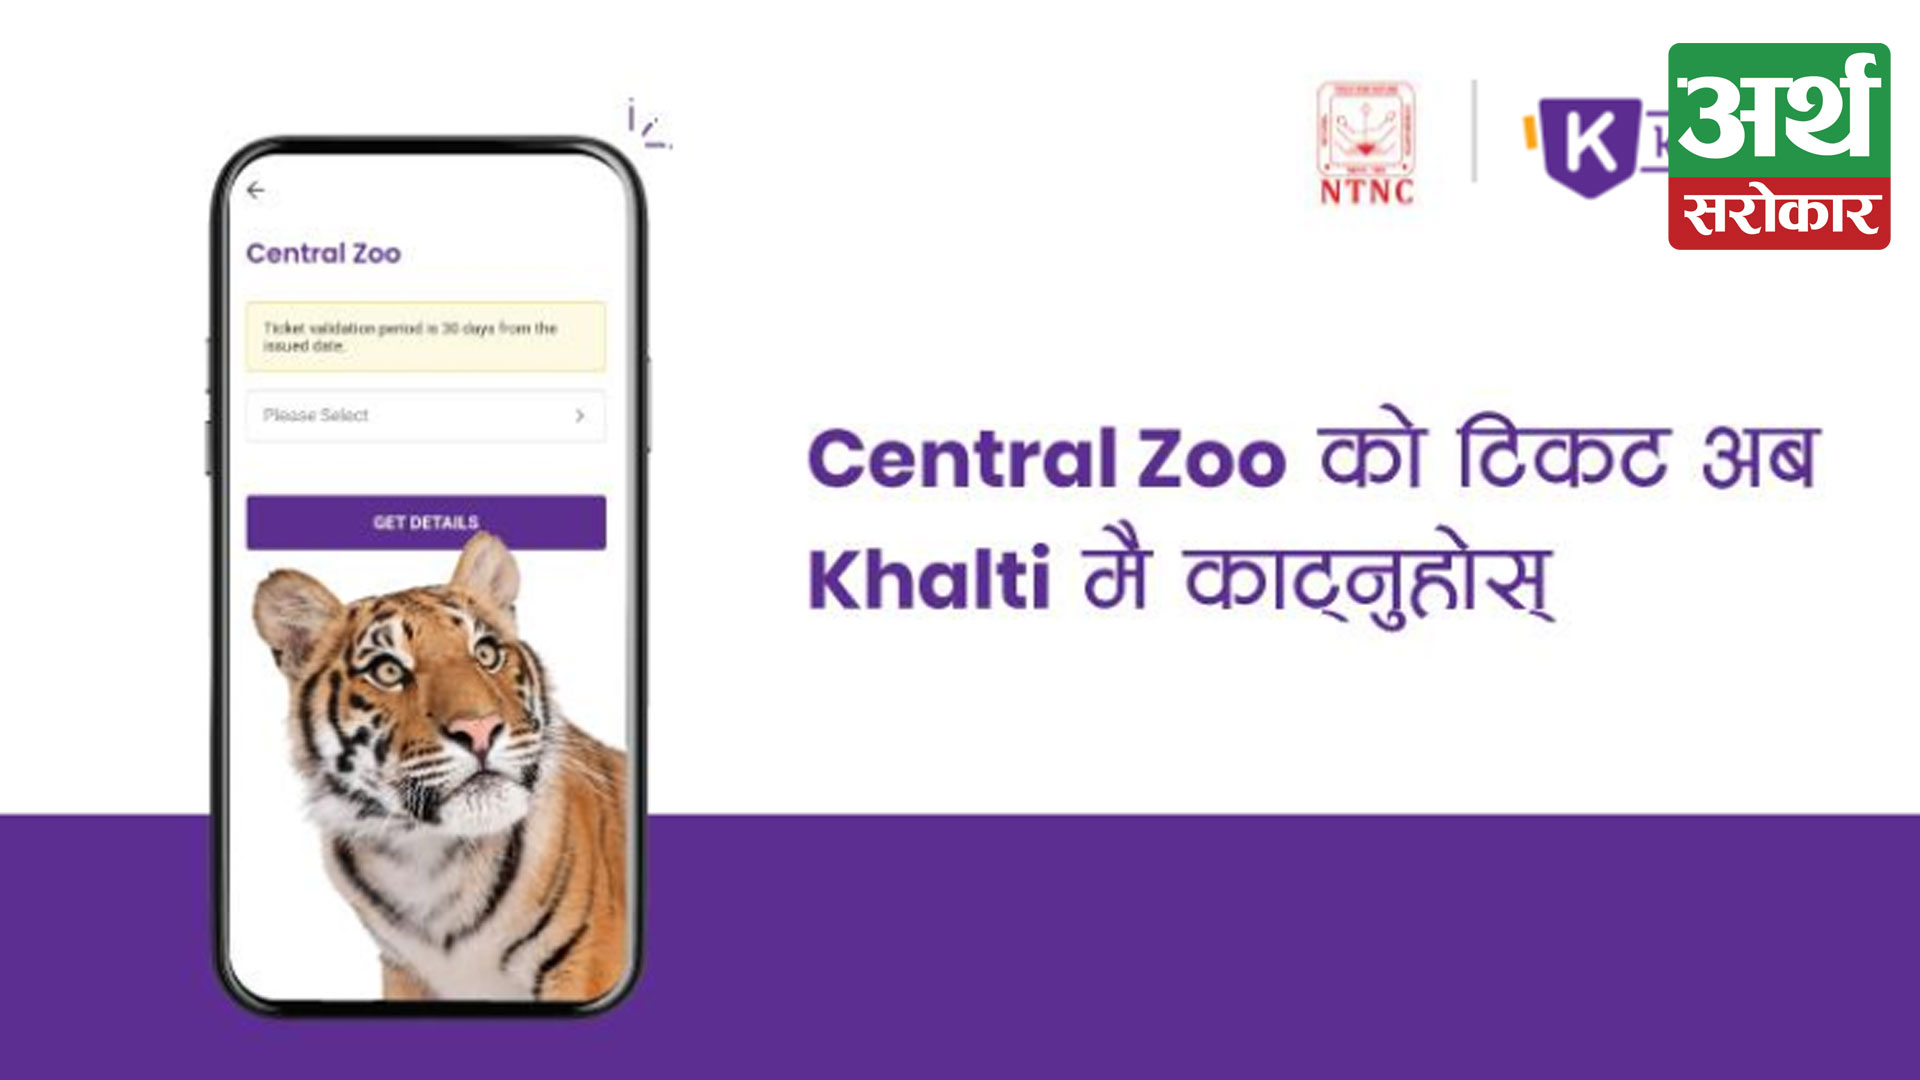 Central Zoo online ticketing is now available in Khalti App